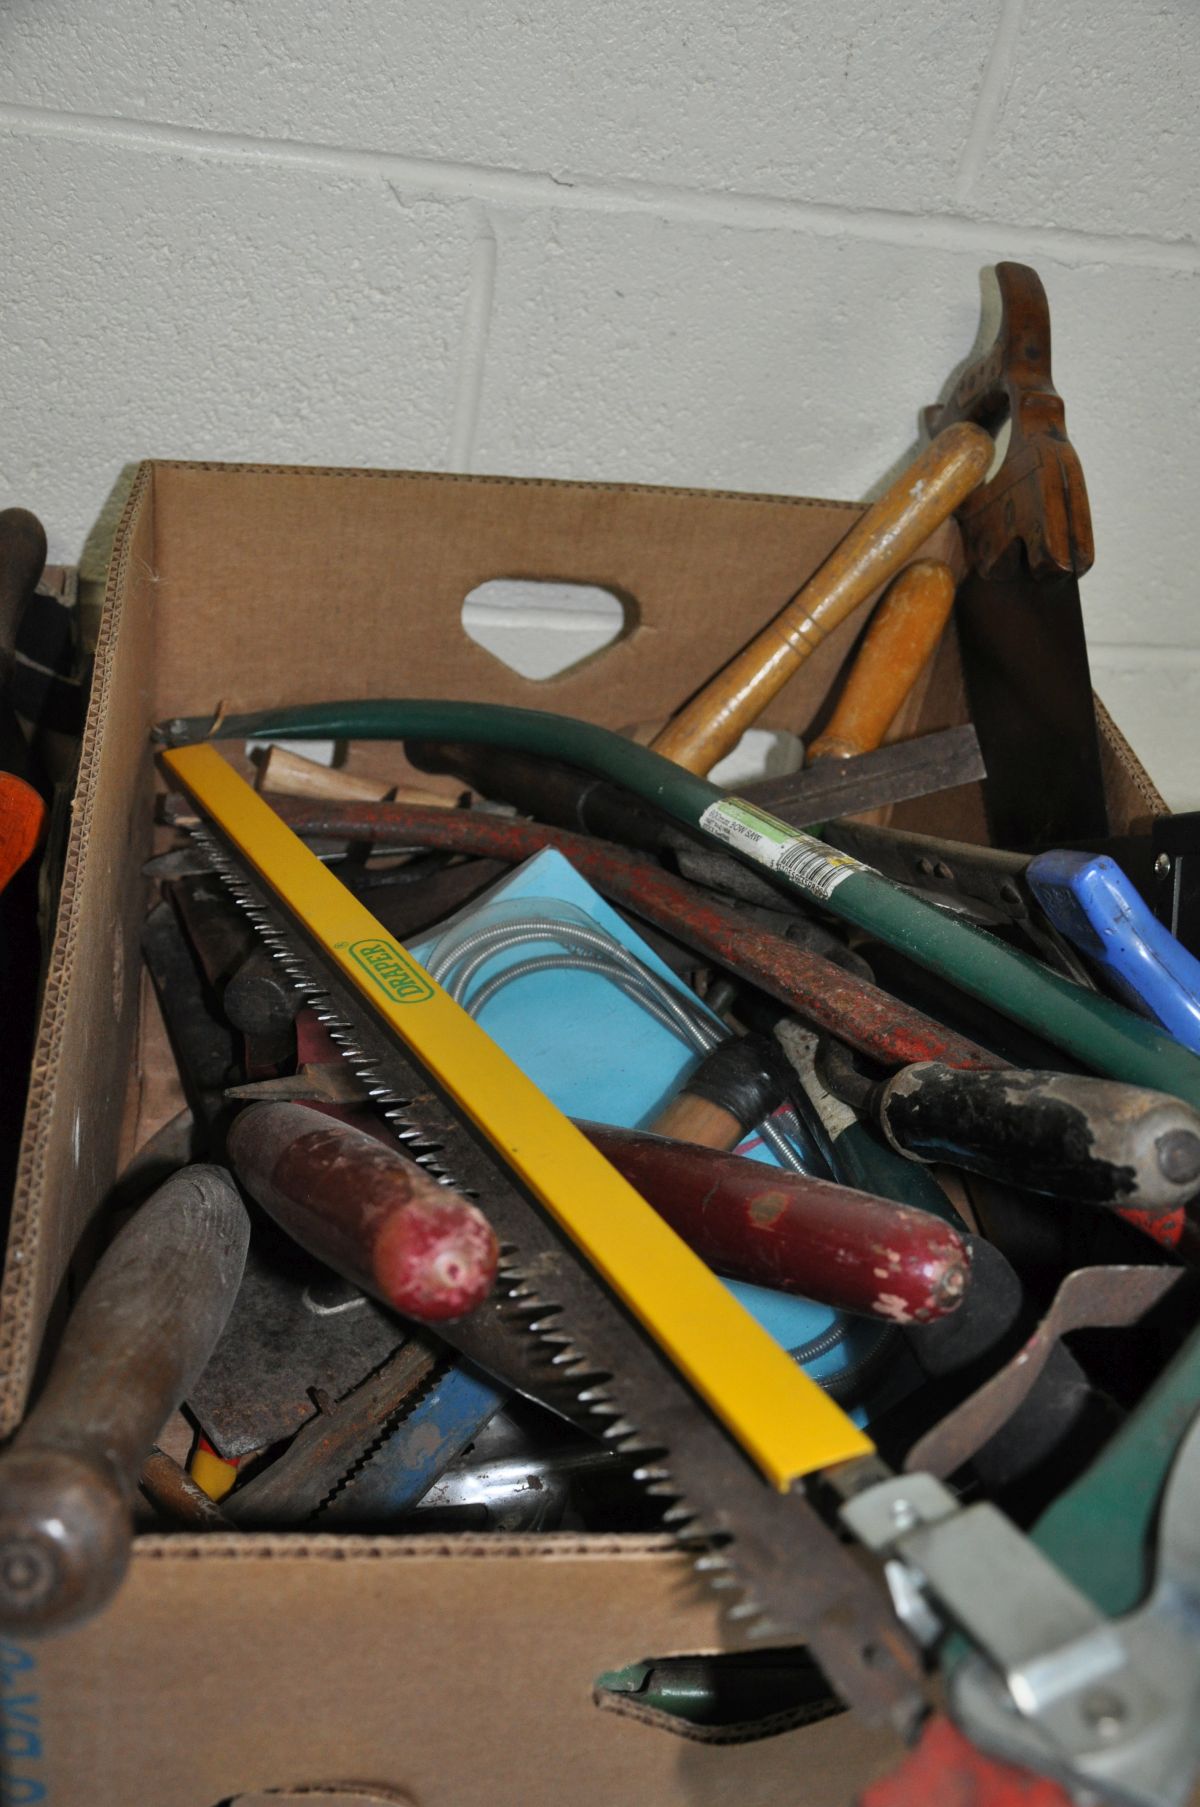 TWO TRAYS CONTAINING WOODWORKING TOOLS including a Record No 05 plane, chisels, awls, brace, saws, - Image 3 of 3